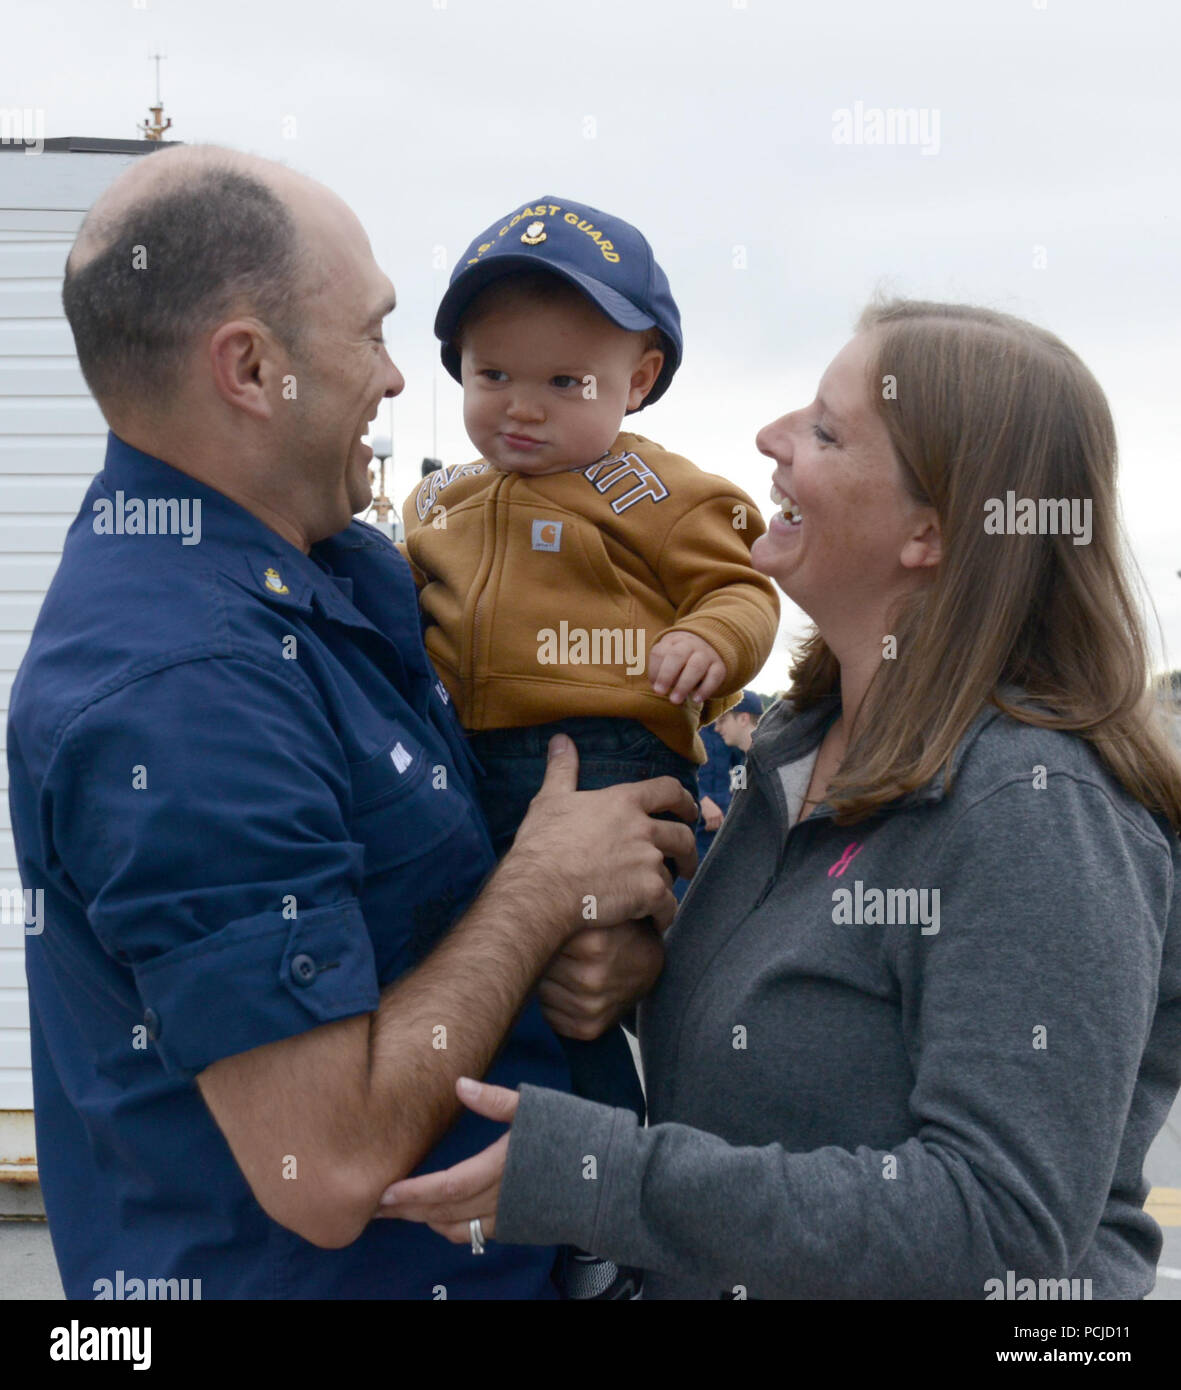 Chief Petty Officer James Maida, a boatswains mate aboard the Coast Guard Cutter Alex Haley (WMEC 39), greets his family after the cutter moored at its homeport in Kodiak, Alaska, August 1, 2018. The crew members of the Alex Haley returned from a 90-day deployment patrolling more than 16,000 miles throughout the Pacific Ocean. U.S. Coast Guard photo by Petty Officer 3rd Class Lauren Dean. Stock Photo